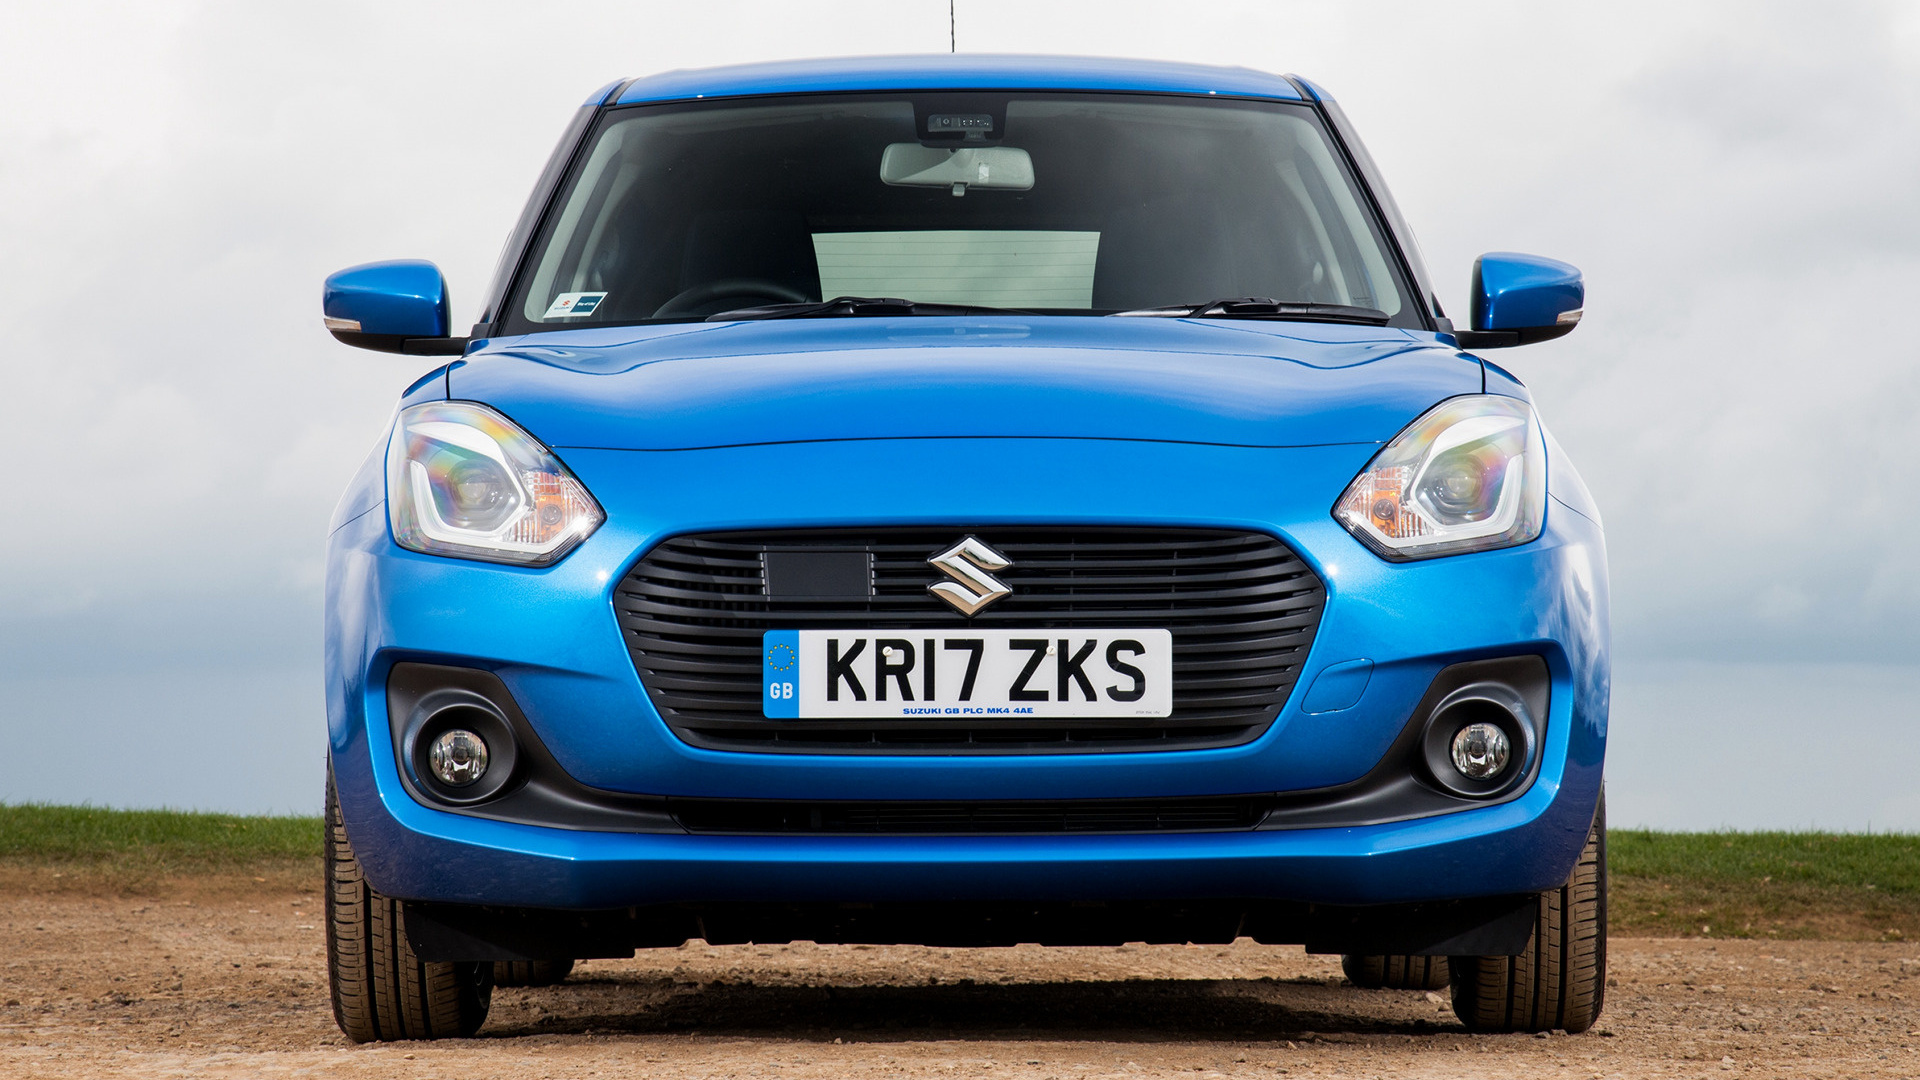 2017 Suzuki Swift (UK) - Wallpapers and HD Images | Car Pixel